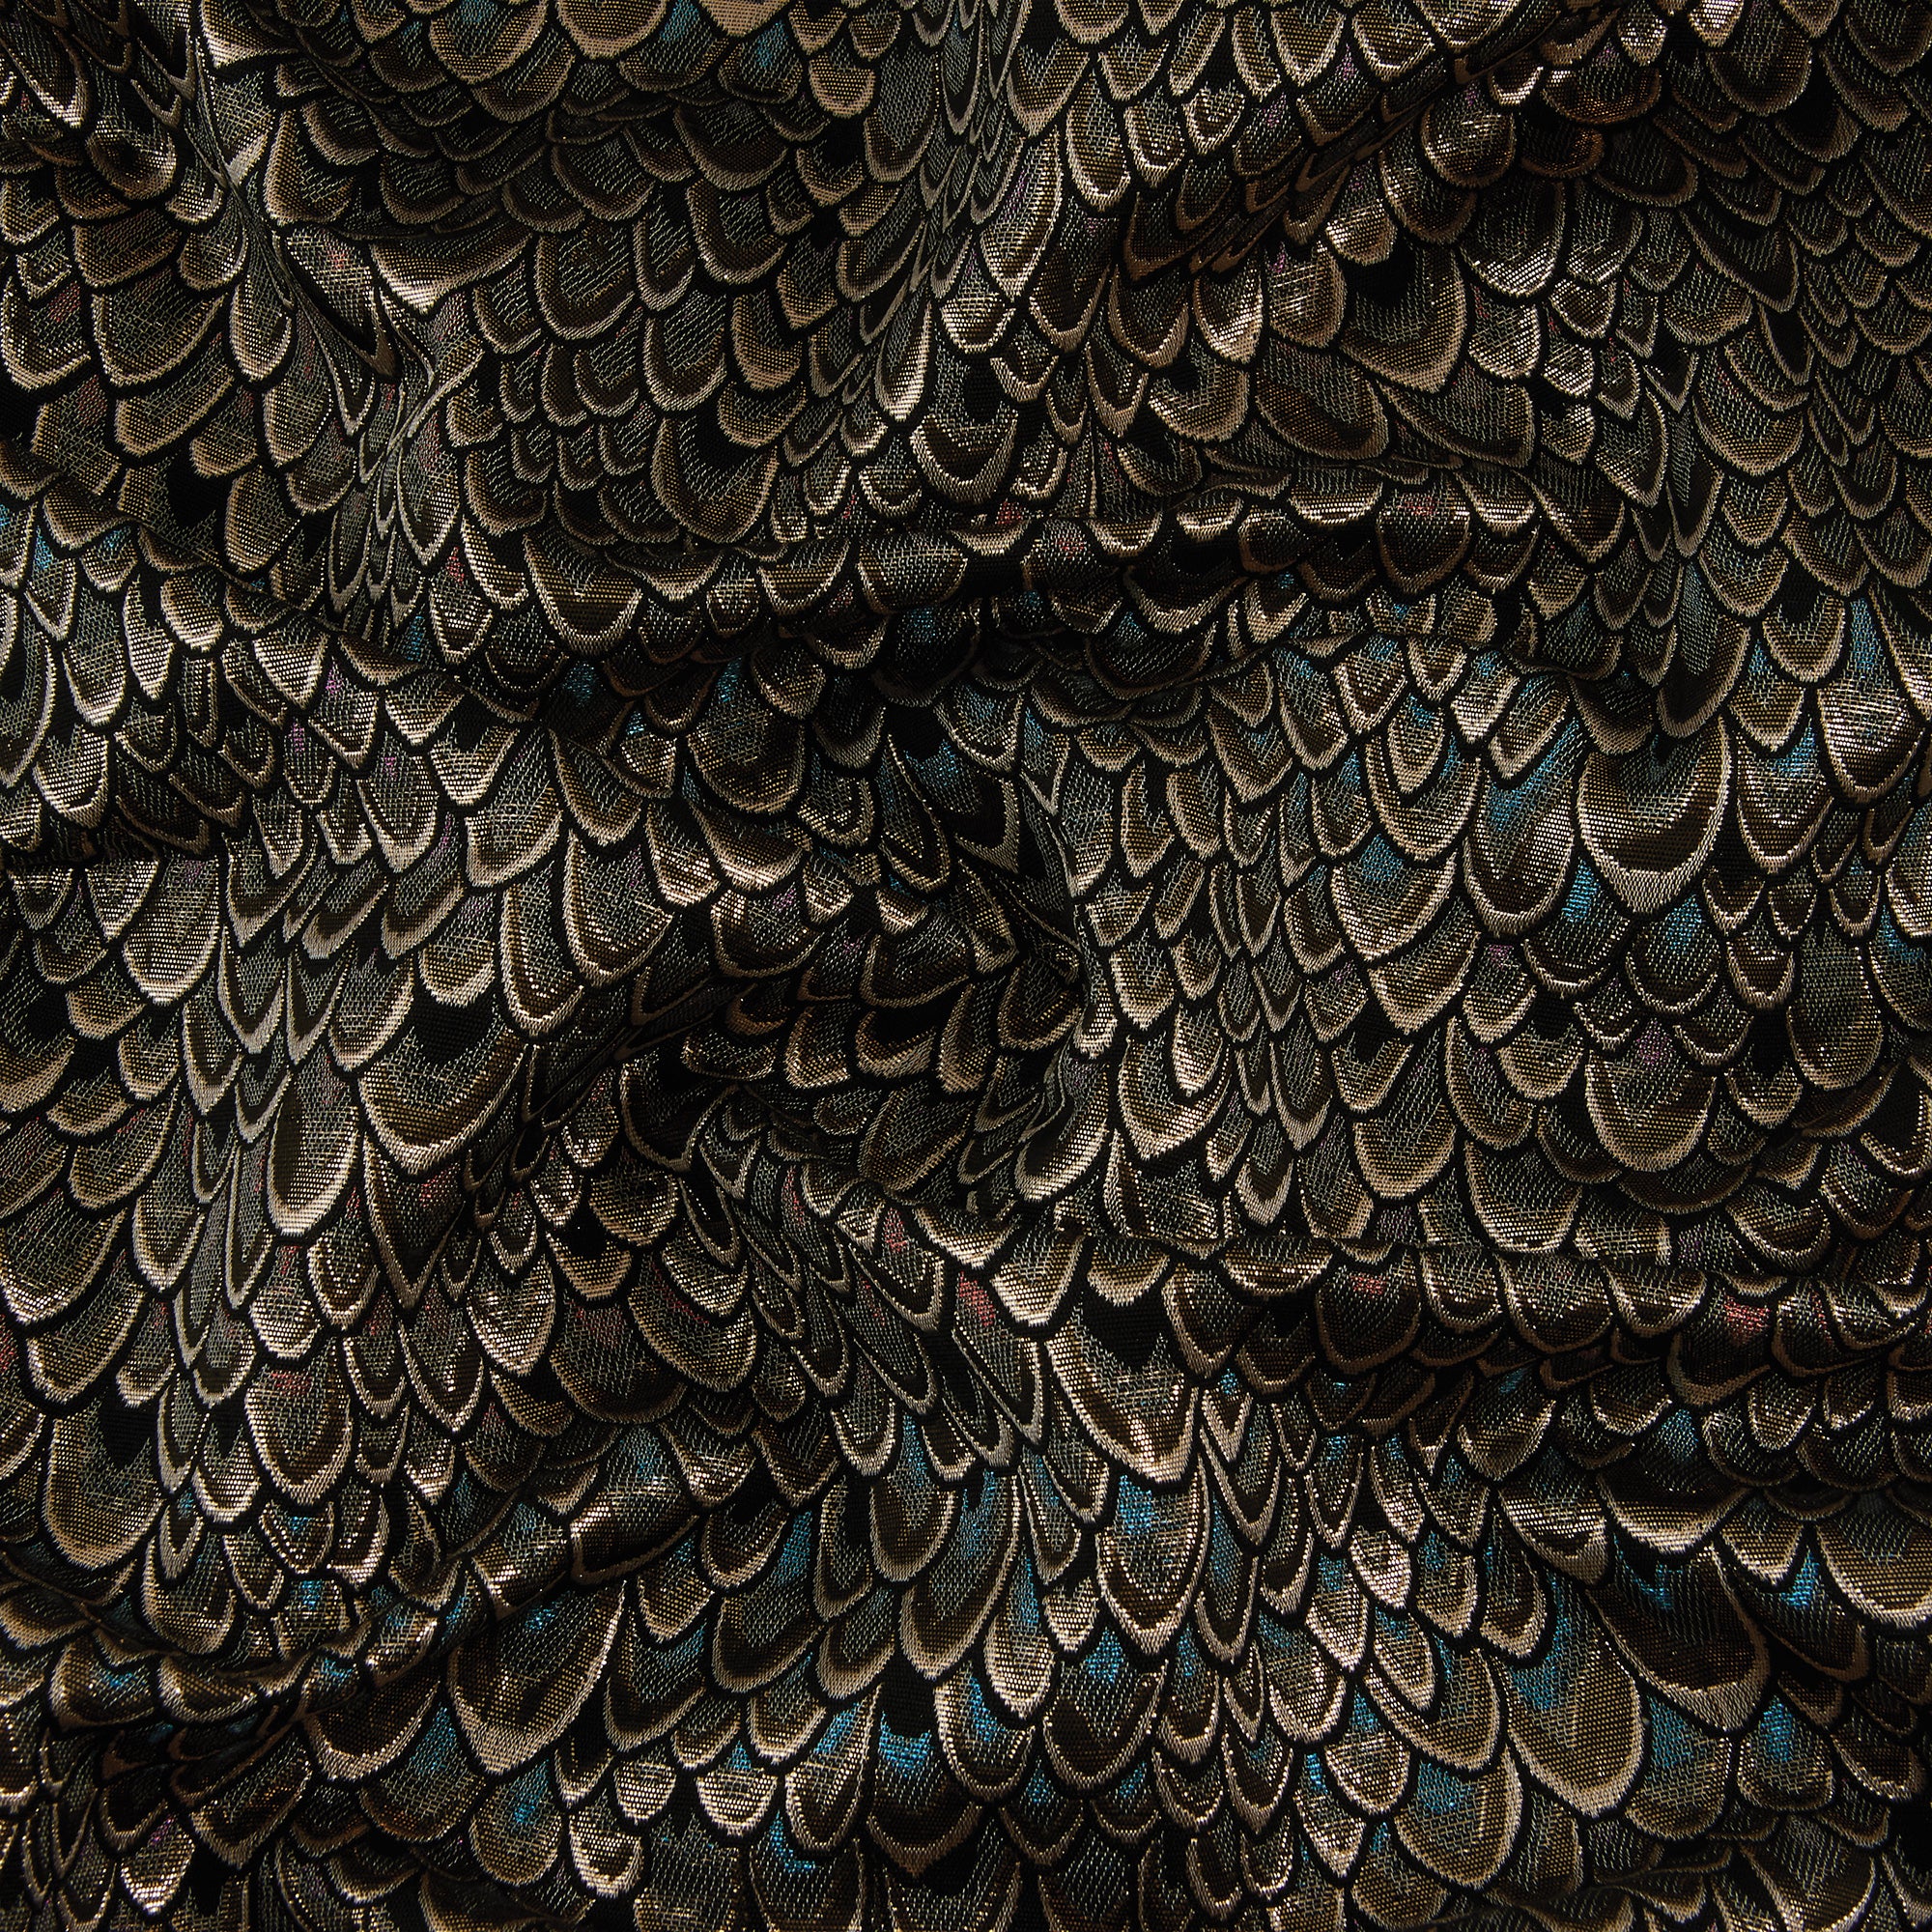 Scaled Brocade, Gold & Teal